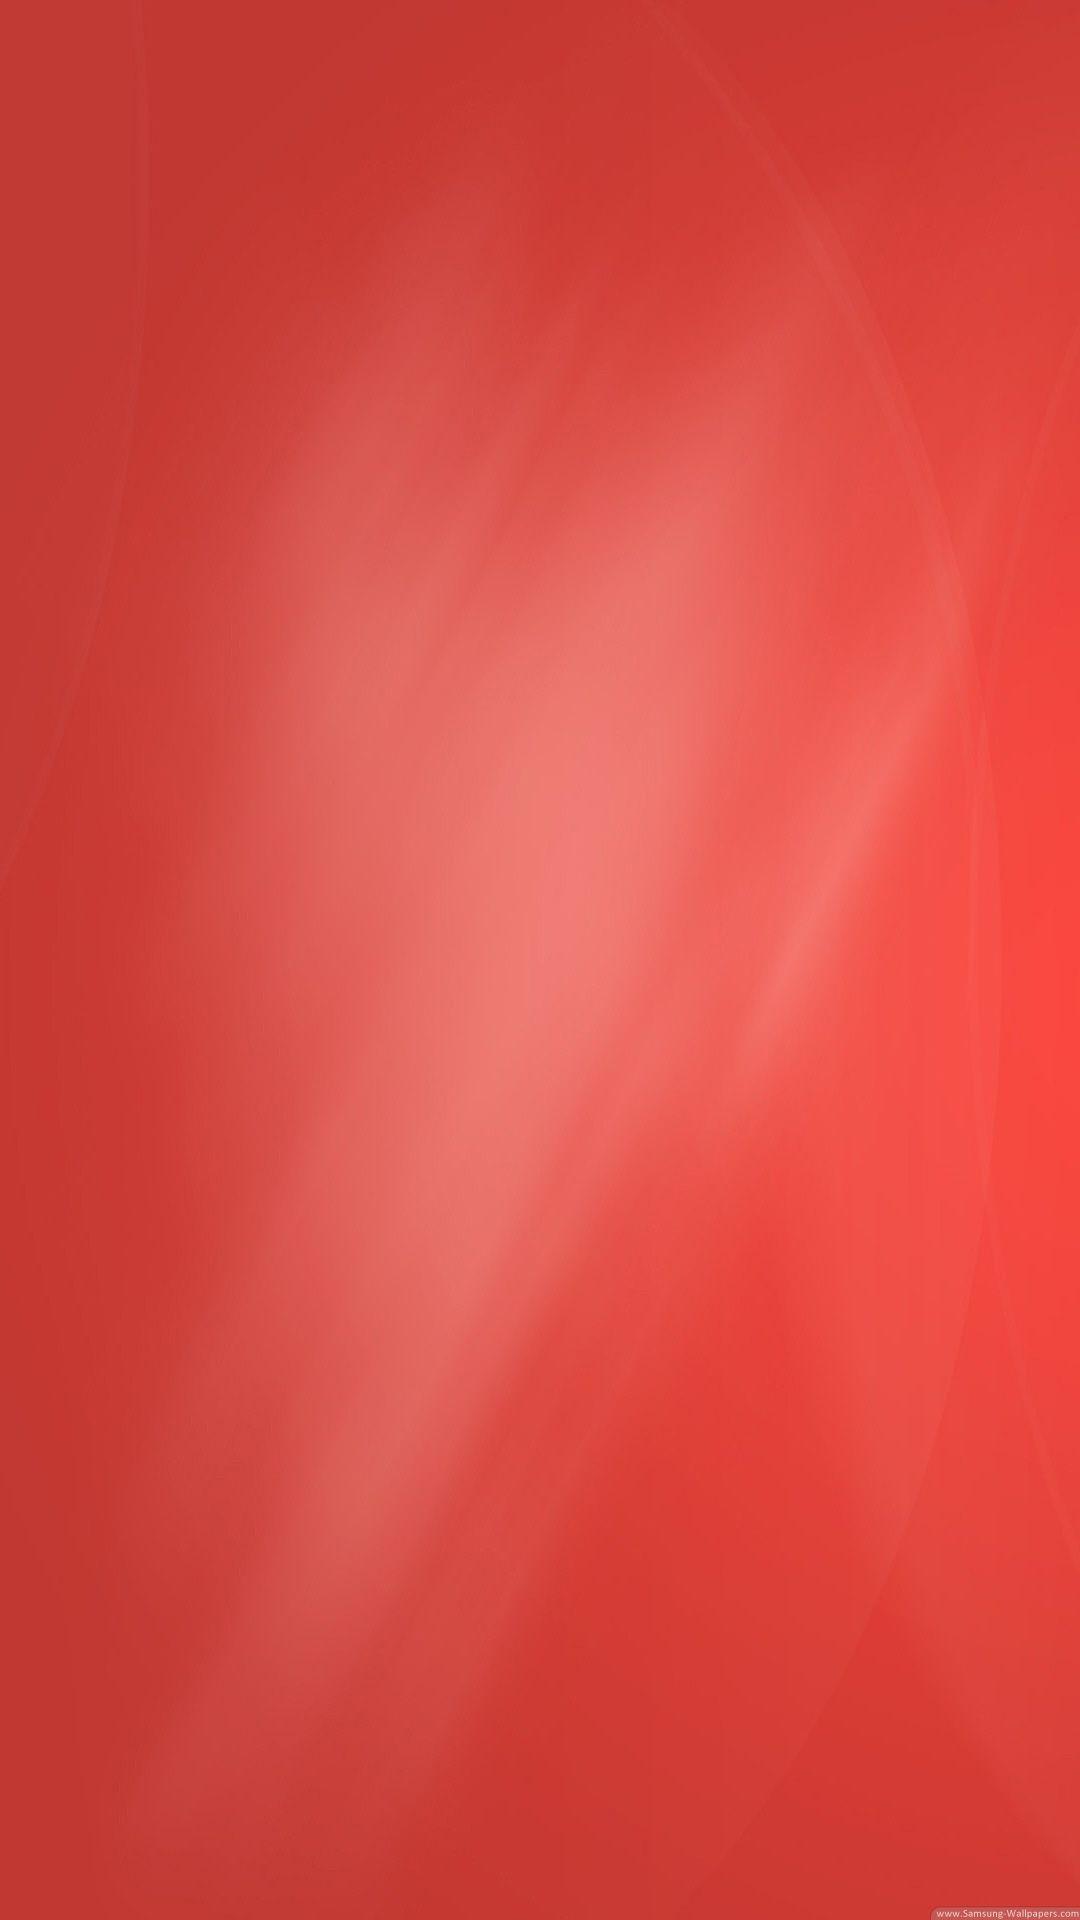 Simple Red Angled Gradient iPhone 6 Plus HD Wallpaper / iPod